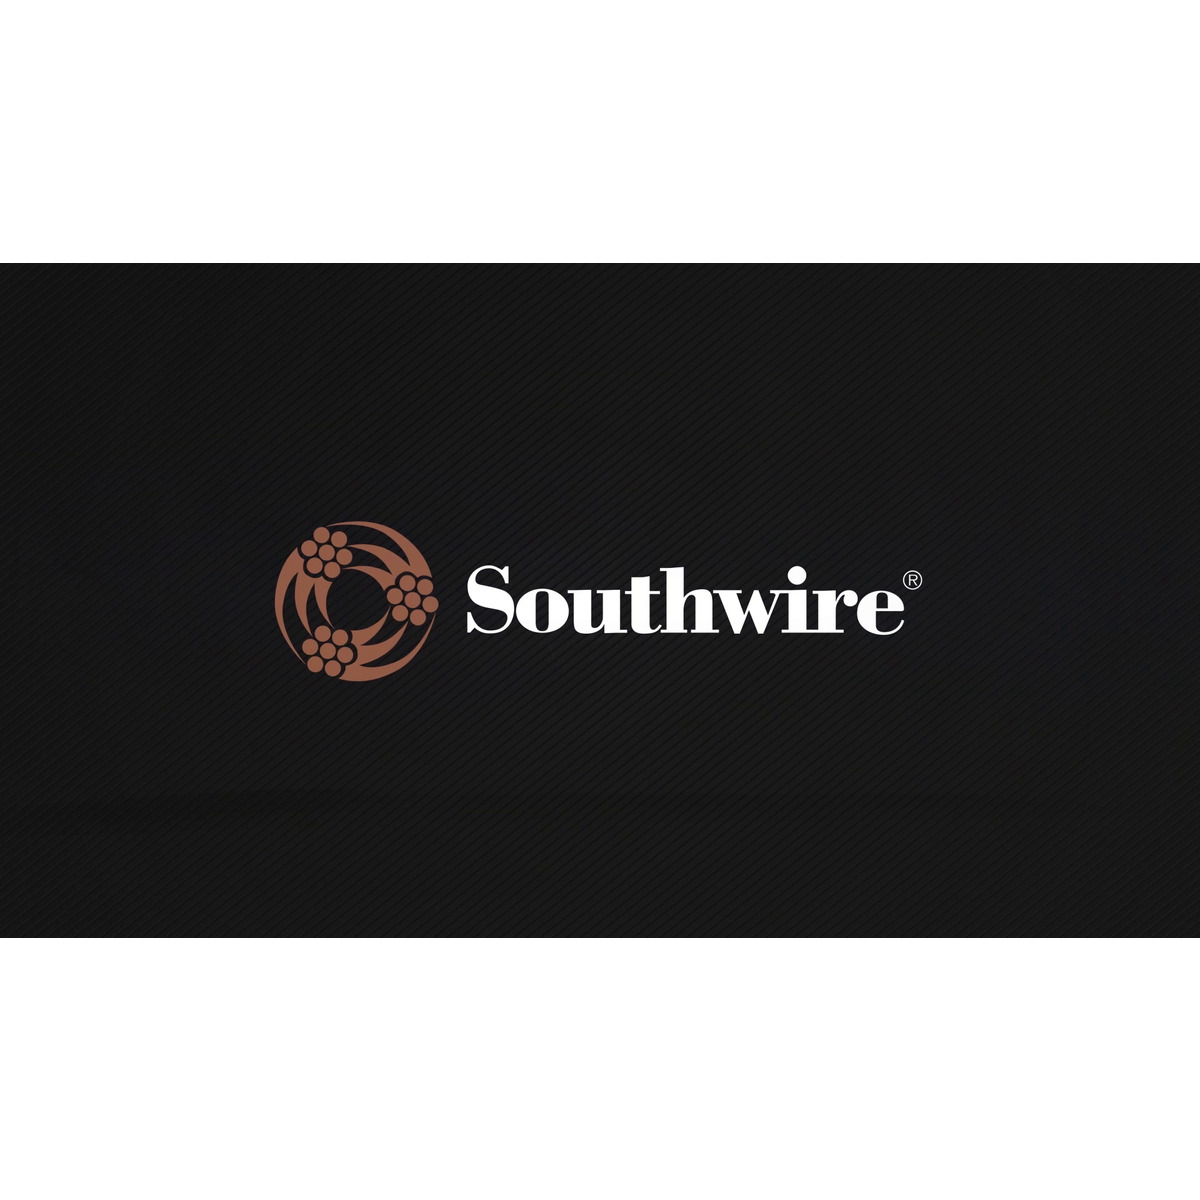 Southwire Elite 1100 Series™ Portable Power Station